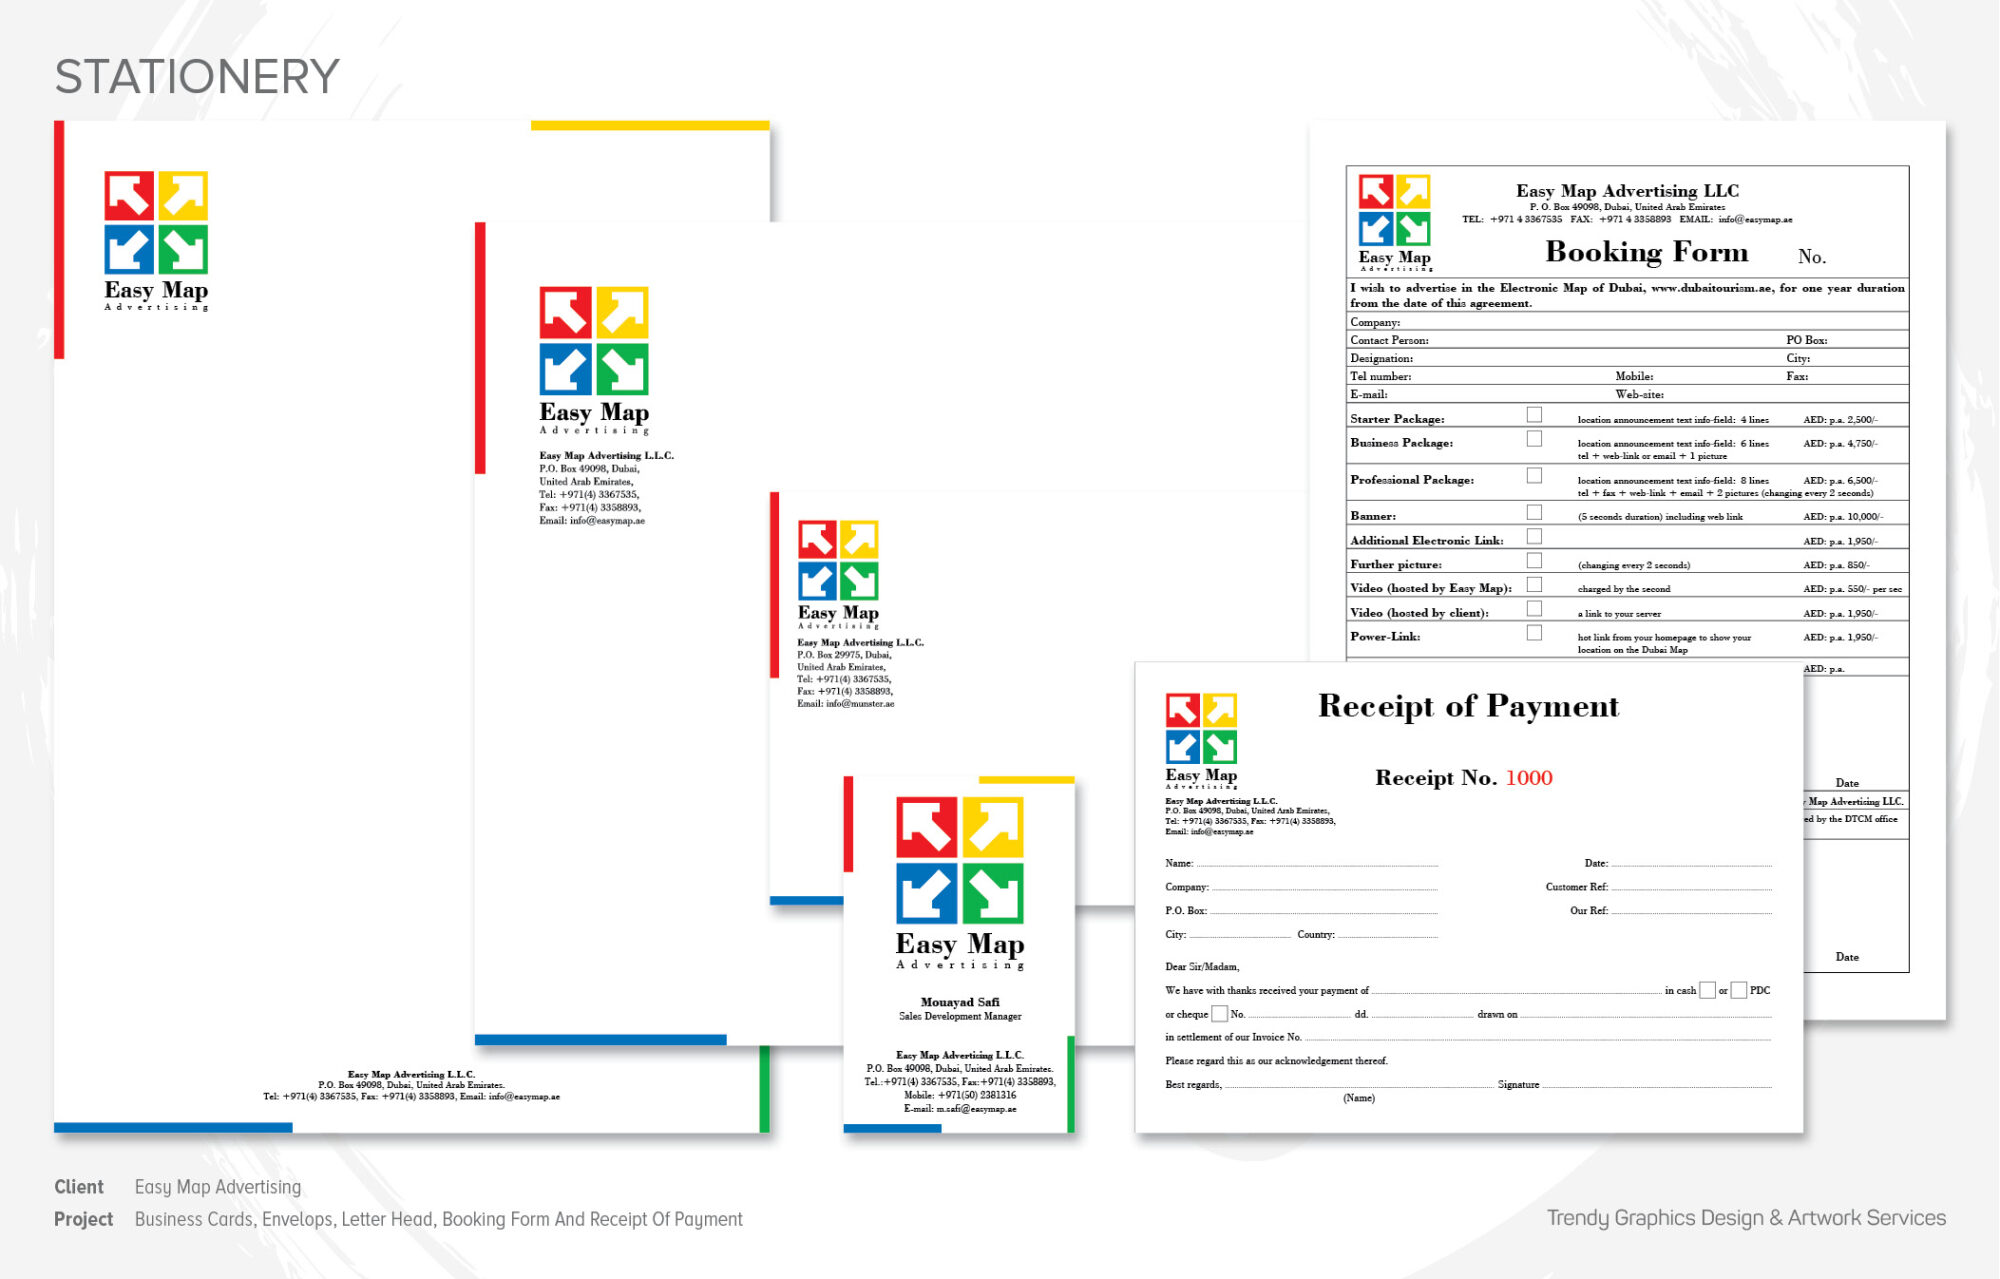 Easy Map Advertising – Business Cards, Envelops, Letter Head, Booking Form And Receipt Of Payment